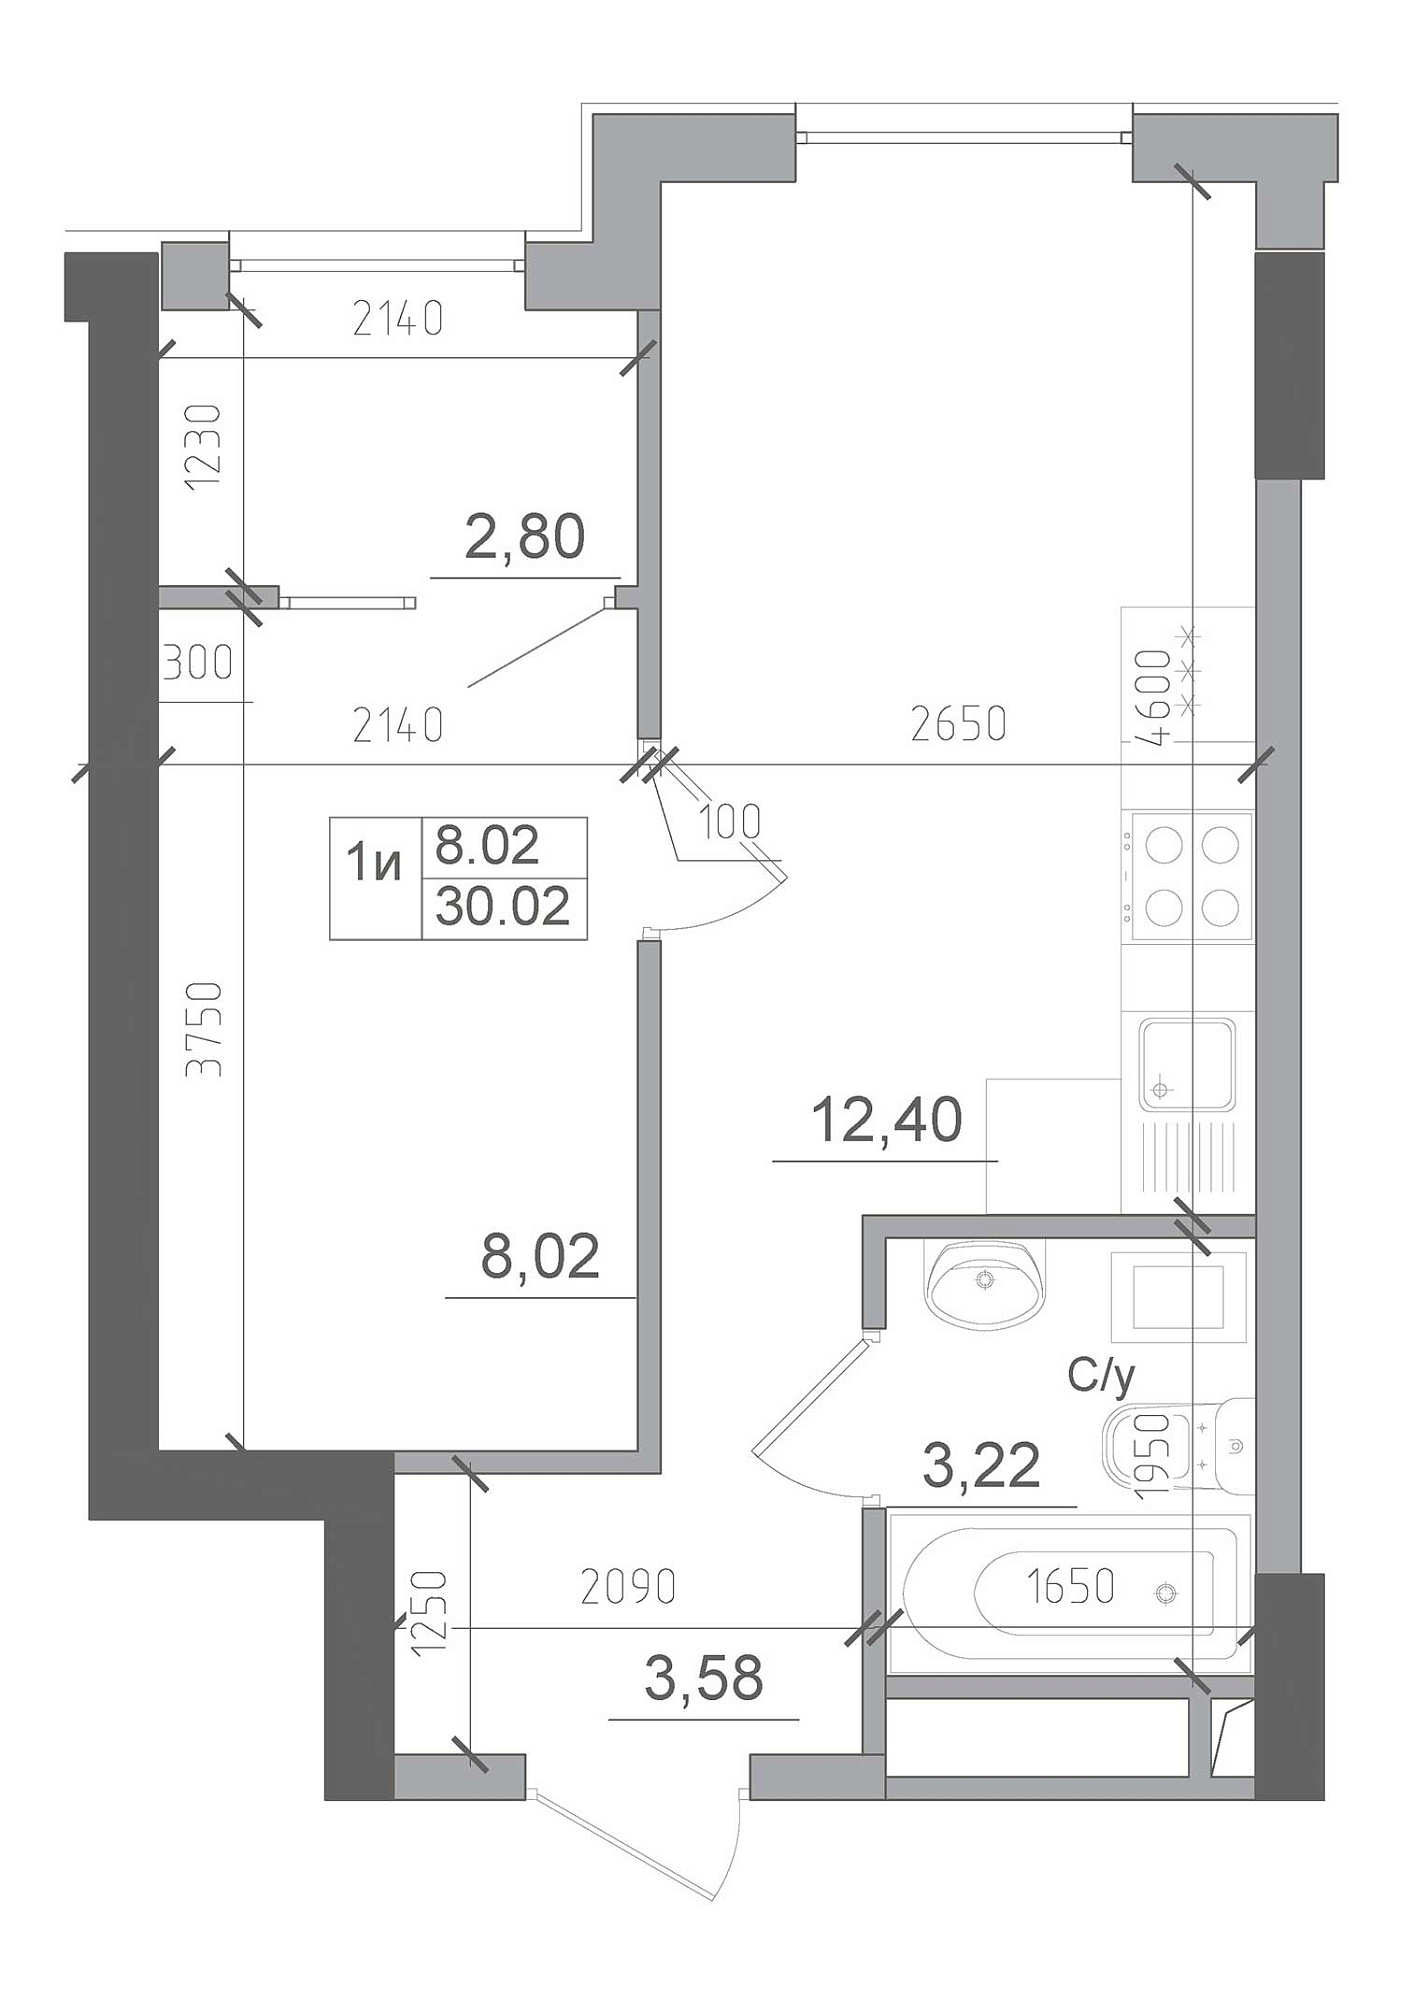 Planning 1-rm flats area 30.02m2, AB-22-06/00014.